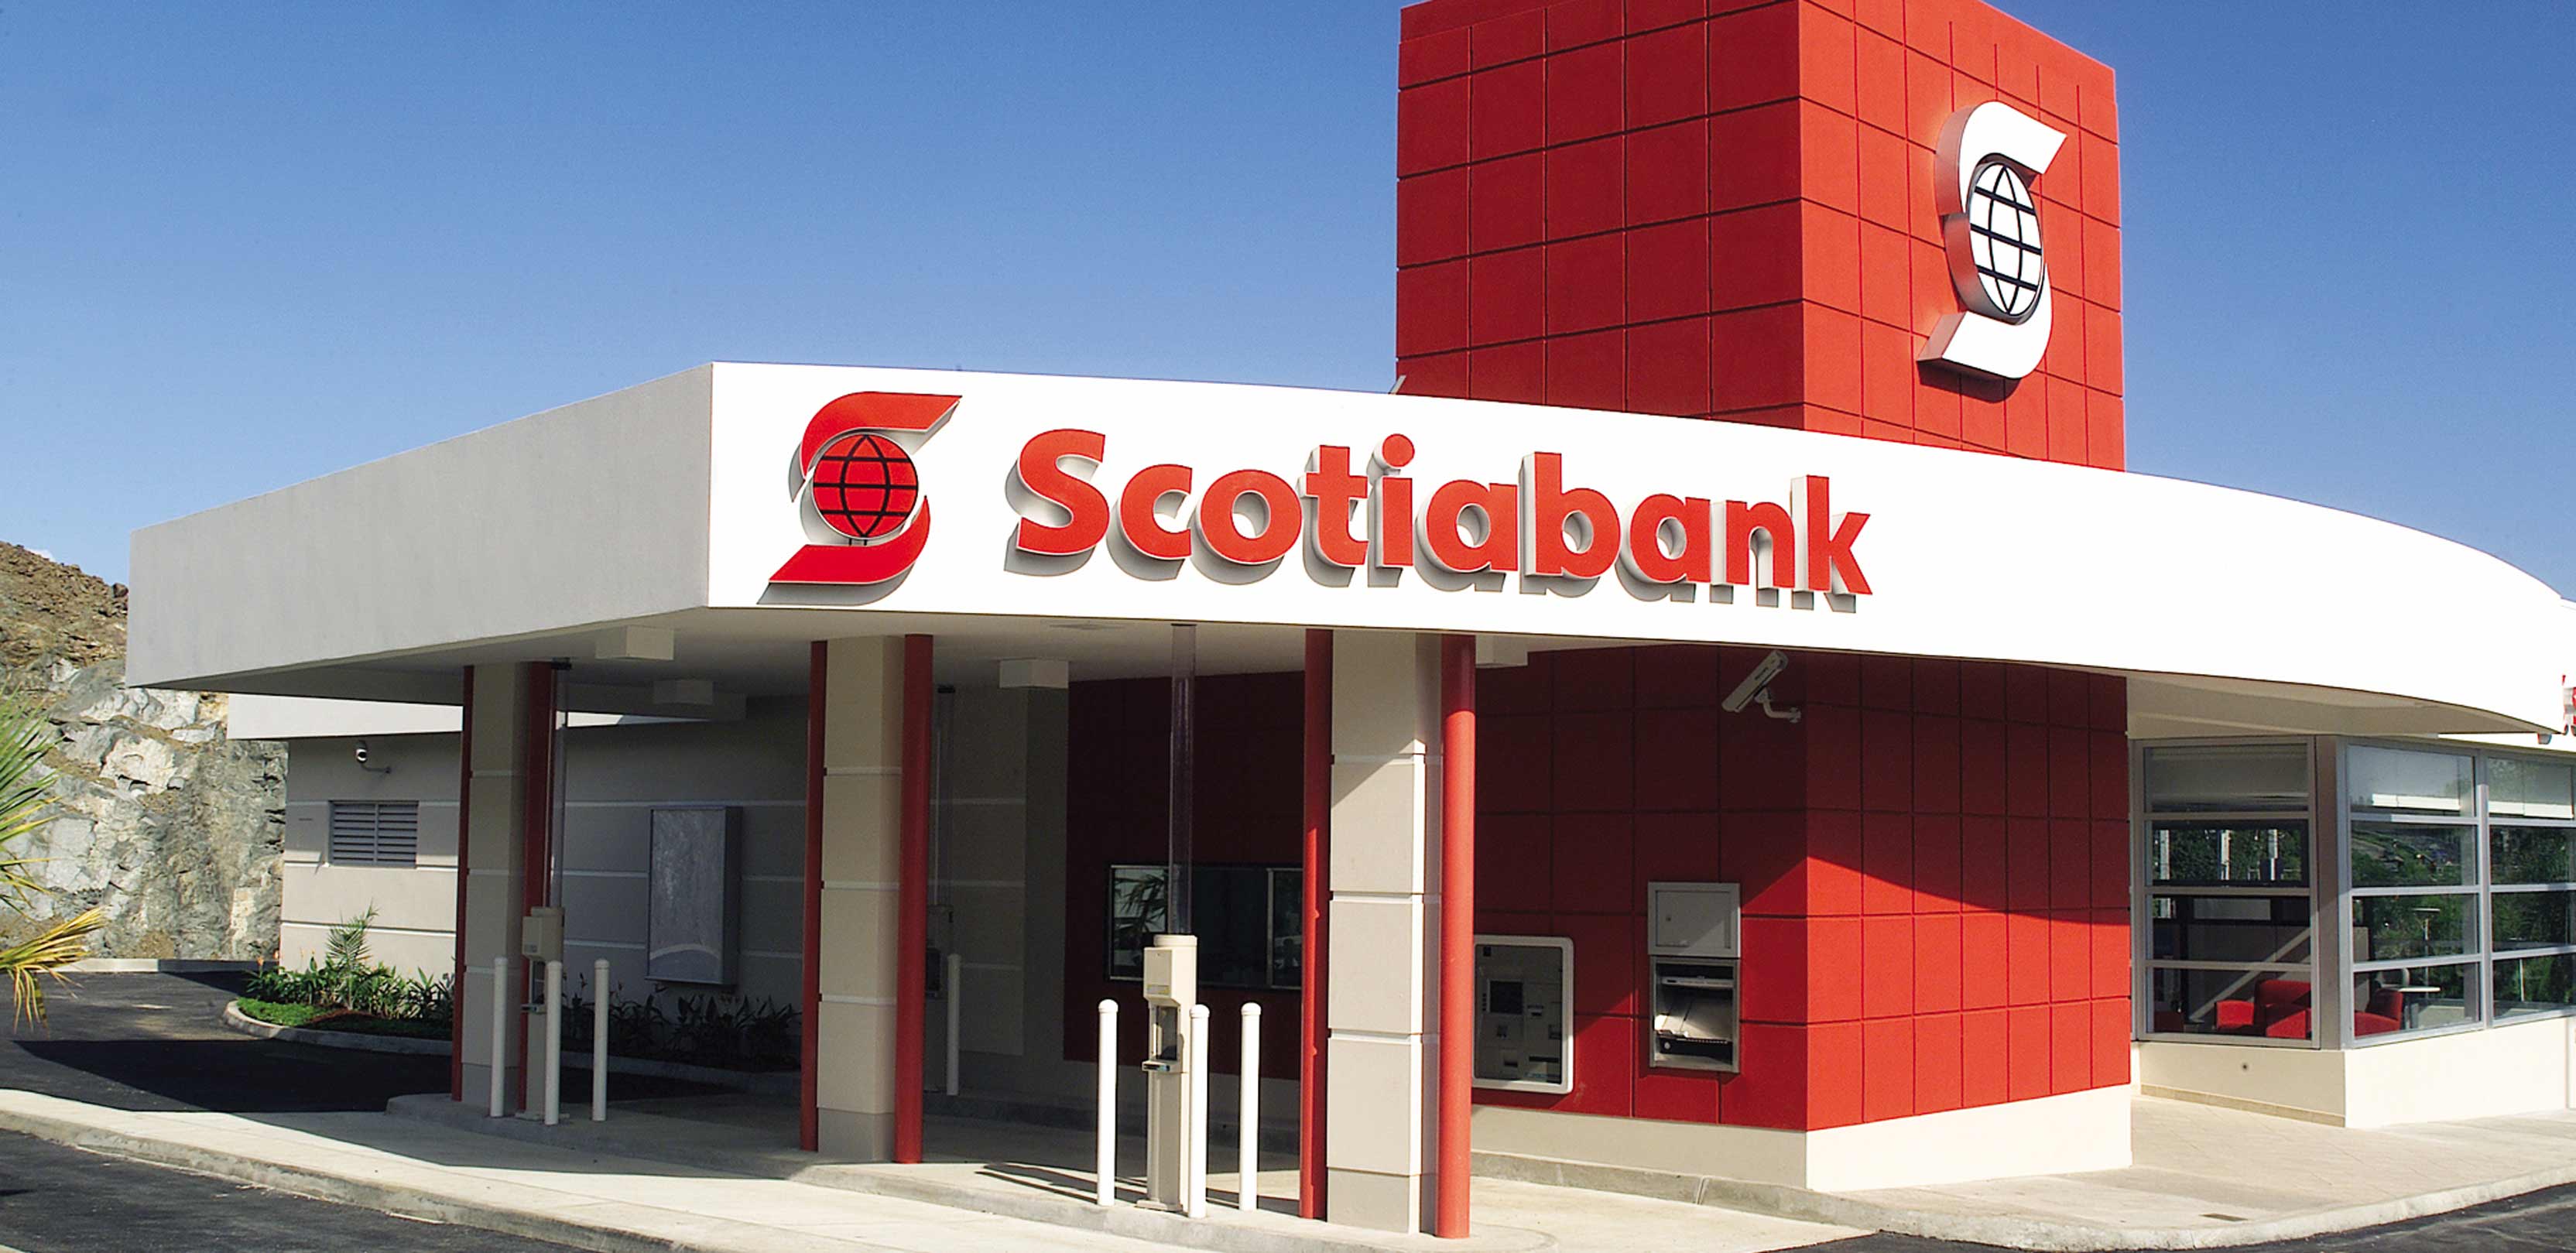 Scotiabank Storefront - Scotiabank cybersecurity